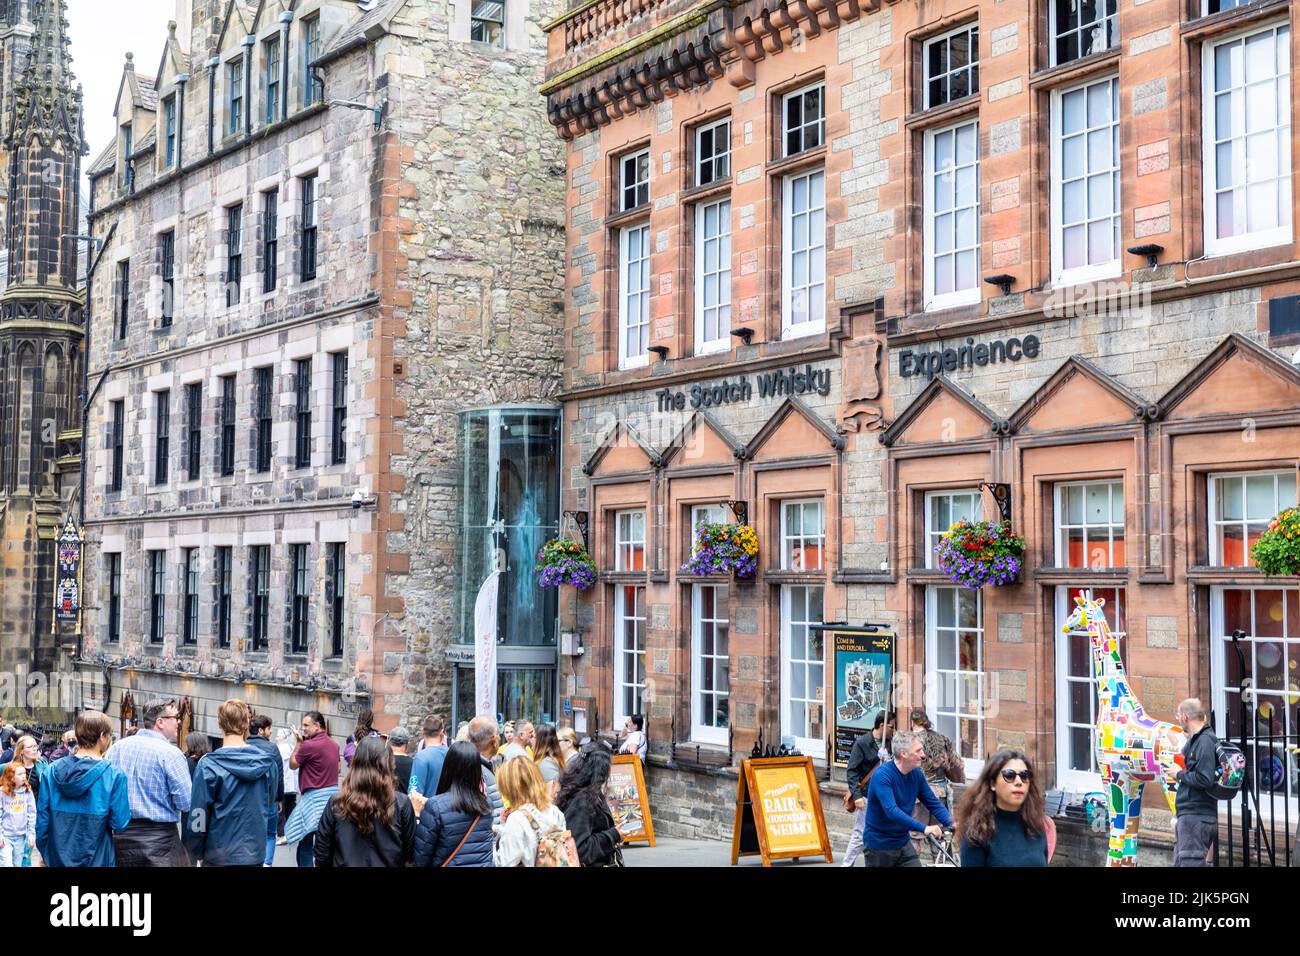 Edinburgh The Royal Mile, tourists outside The Scotch whisky experience, the Witchery restaurant and Tolbrook Kirk,Edinburgh old town,Scotland,summer Stock Photo